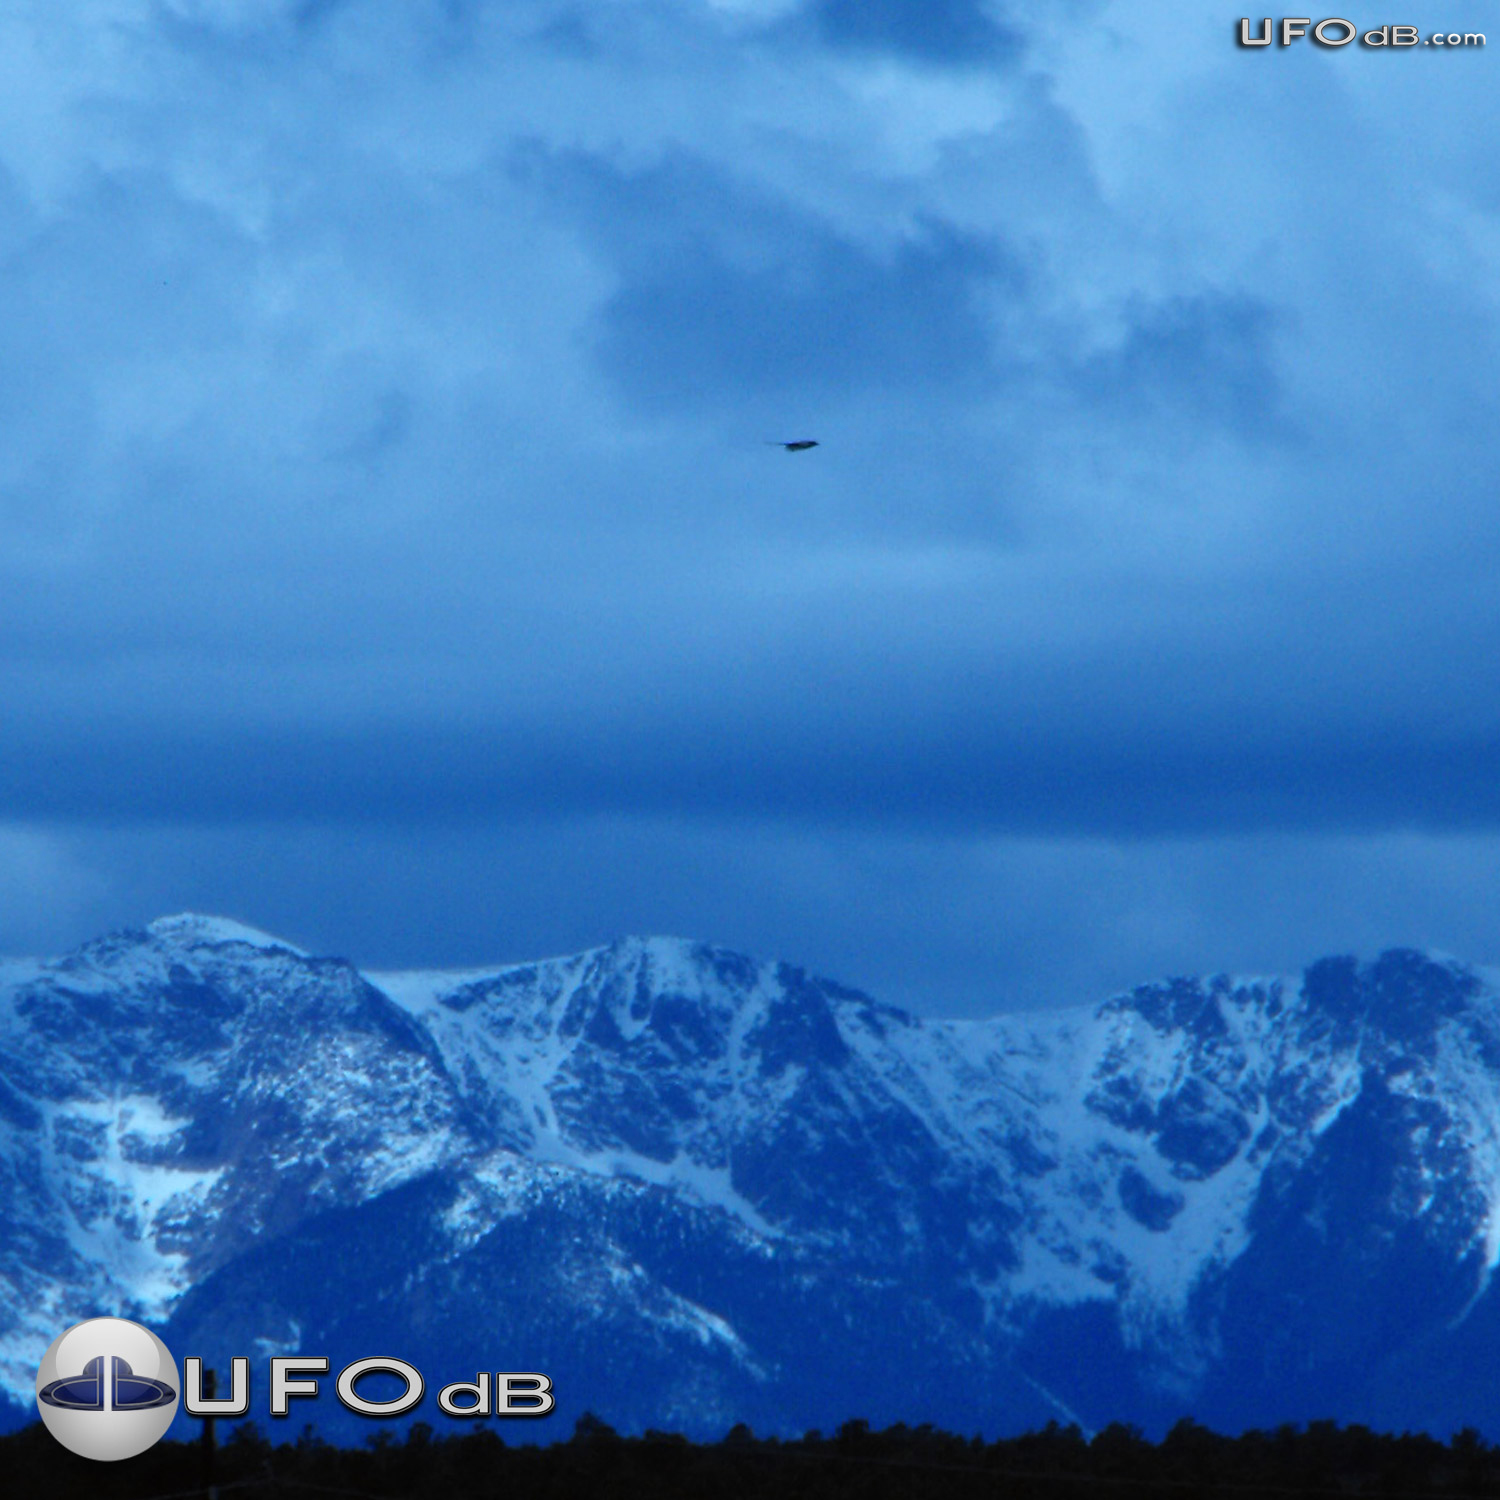 Panoramic picture capture a passing UFO in Colorado, USA | May 21 2011 UFO Picture #325-1